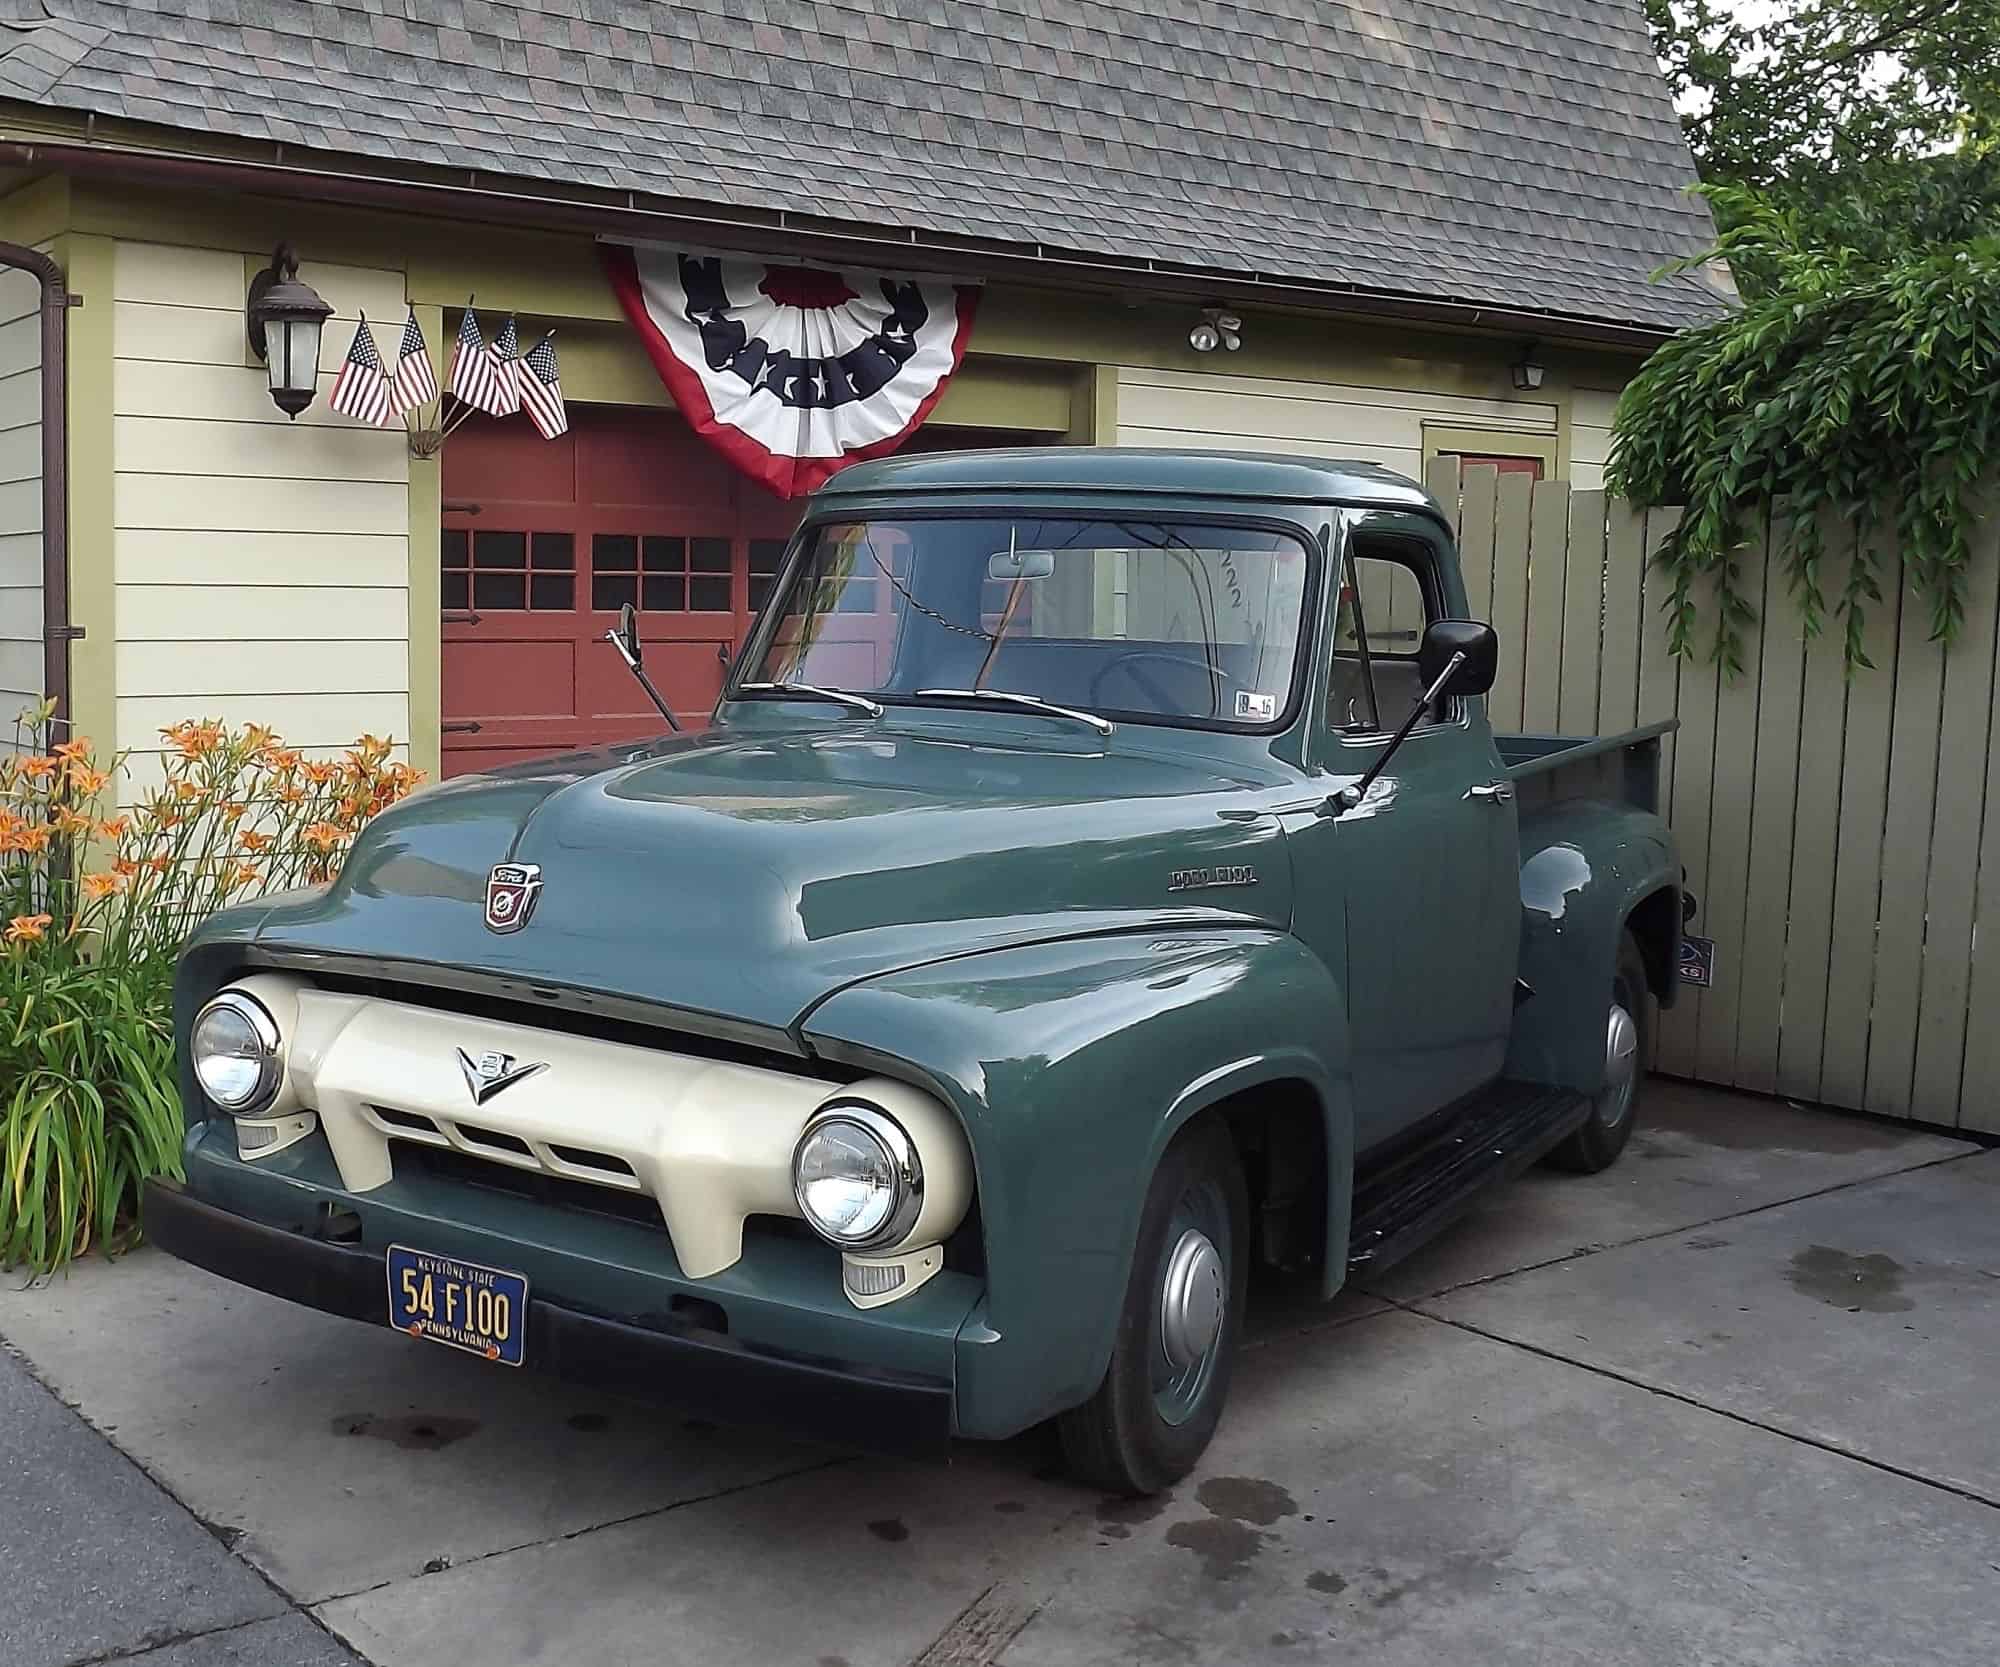 Abe’s 1954 Ford F100 | ClassicCars.com Journal